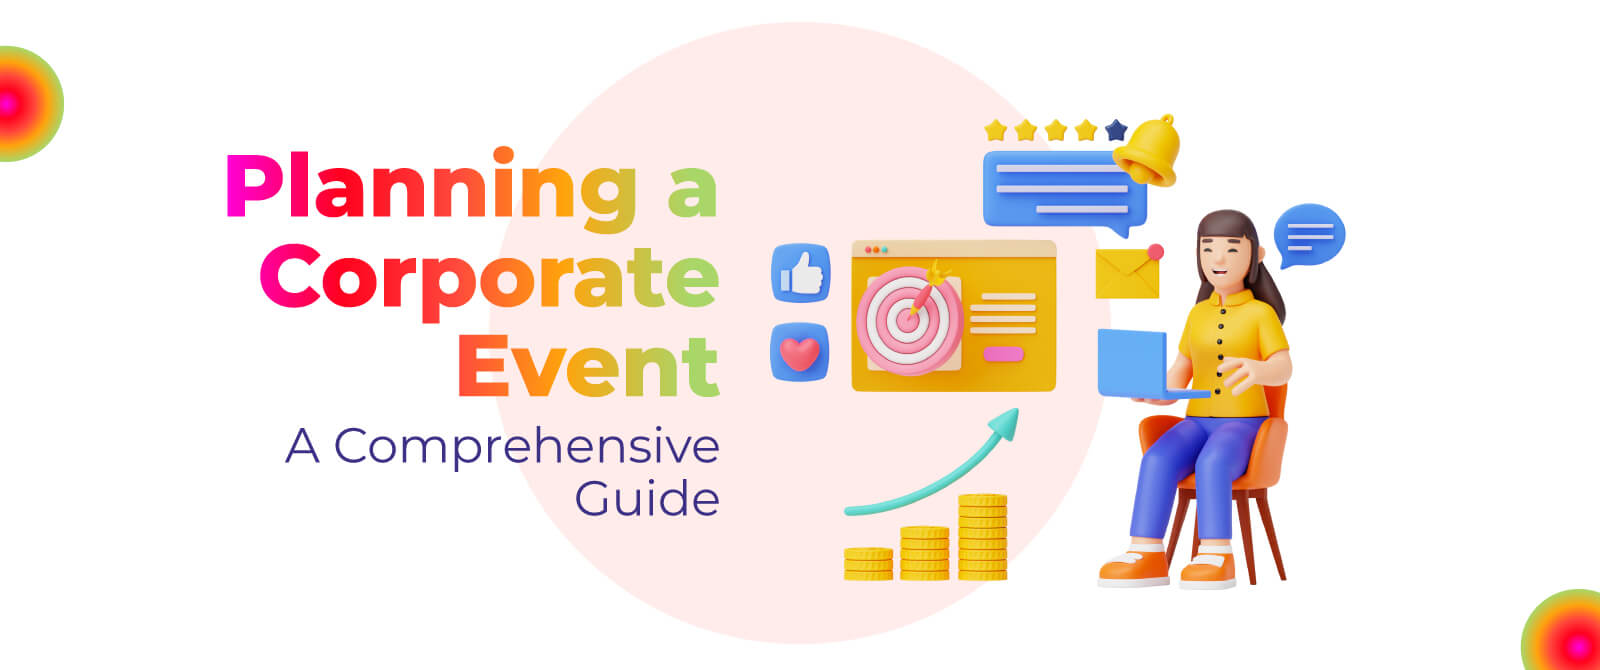 Planning a Corporate Event: A Comprehensive Guide